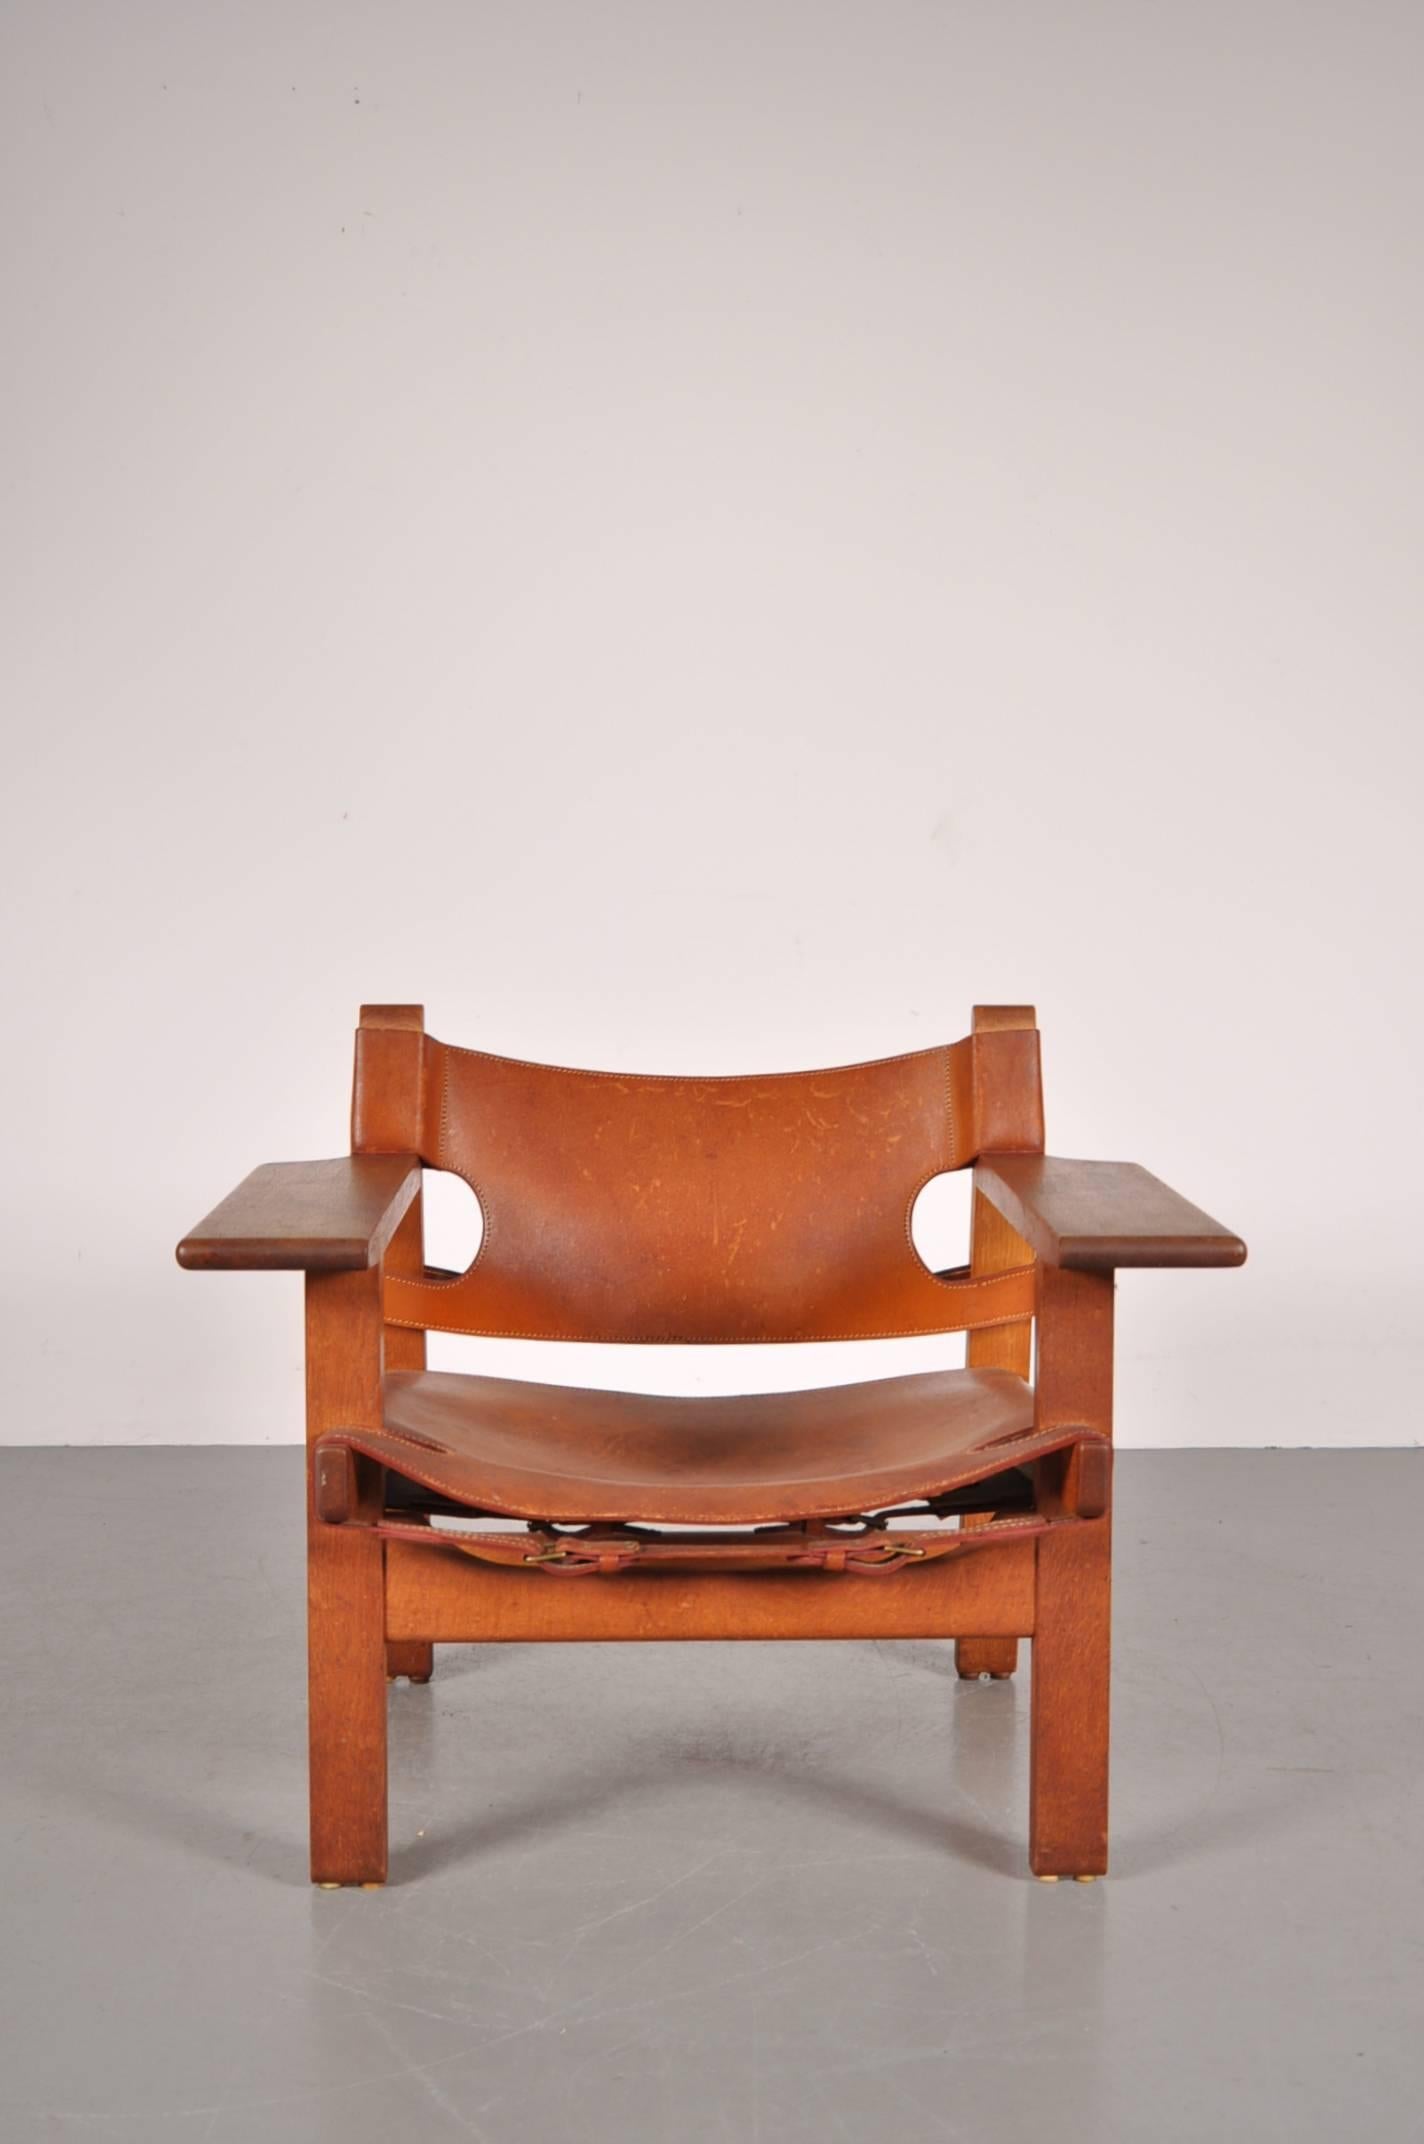 Beautiful early edition Spanish chair by Børge Mogensen for Frederica Stolefabrik, Denmark, circa 1950.

The chair is made of beautiful oakwood and has a strong butt leather seat and backrest, giving it a strong, rustic appearance. The Spanish